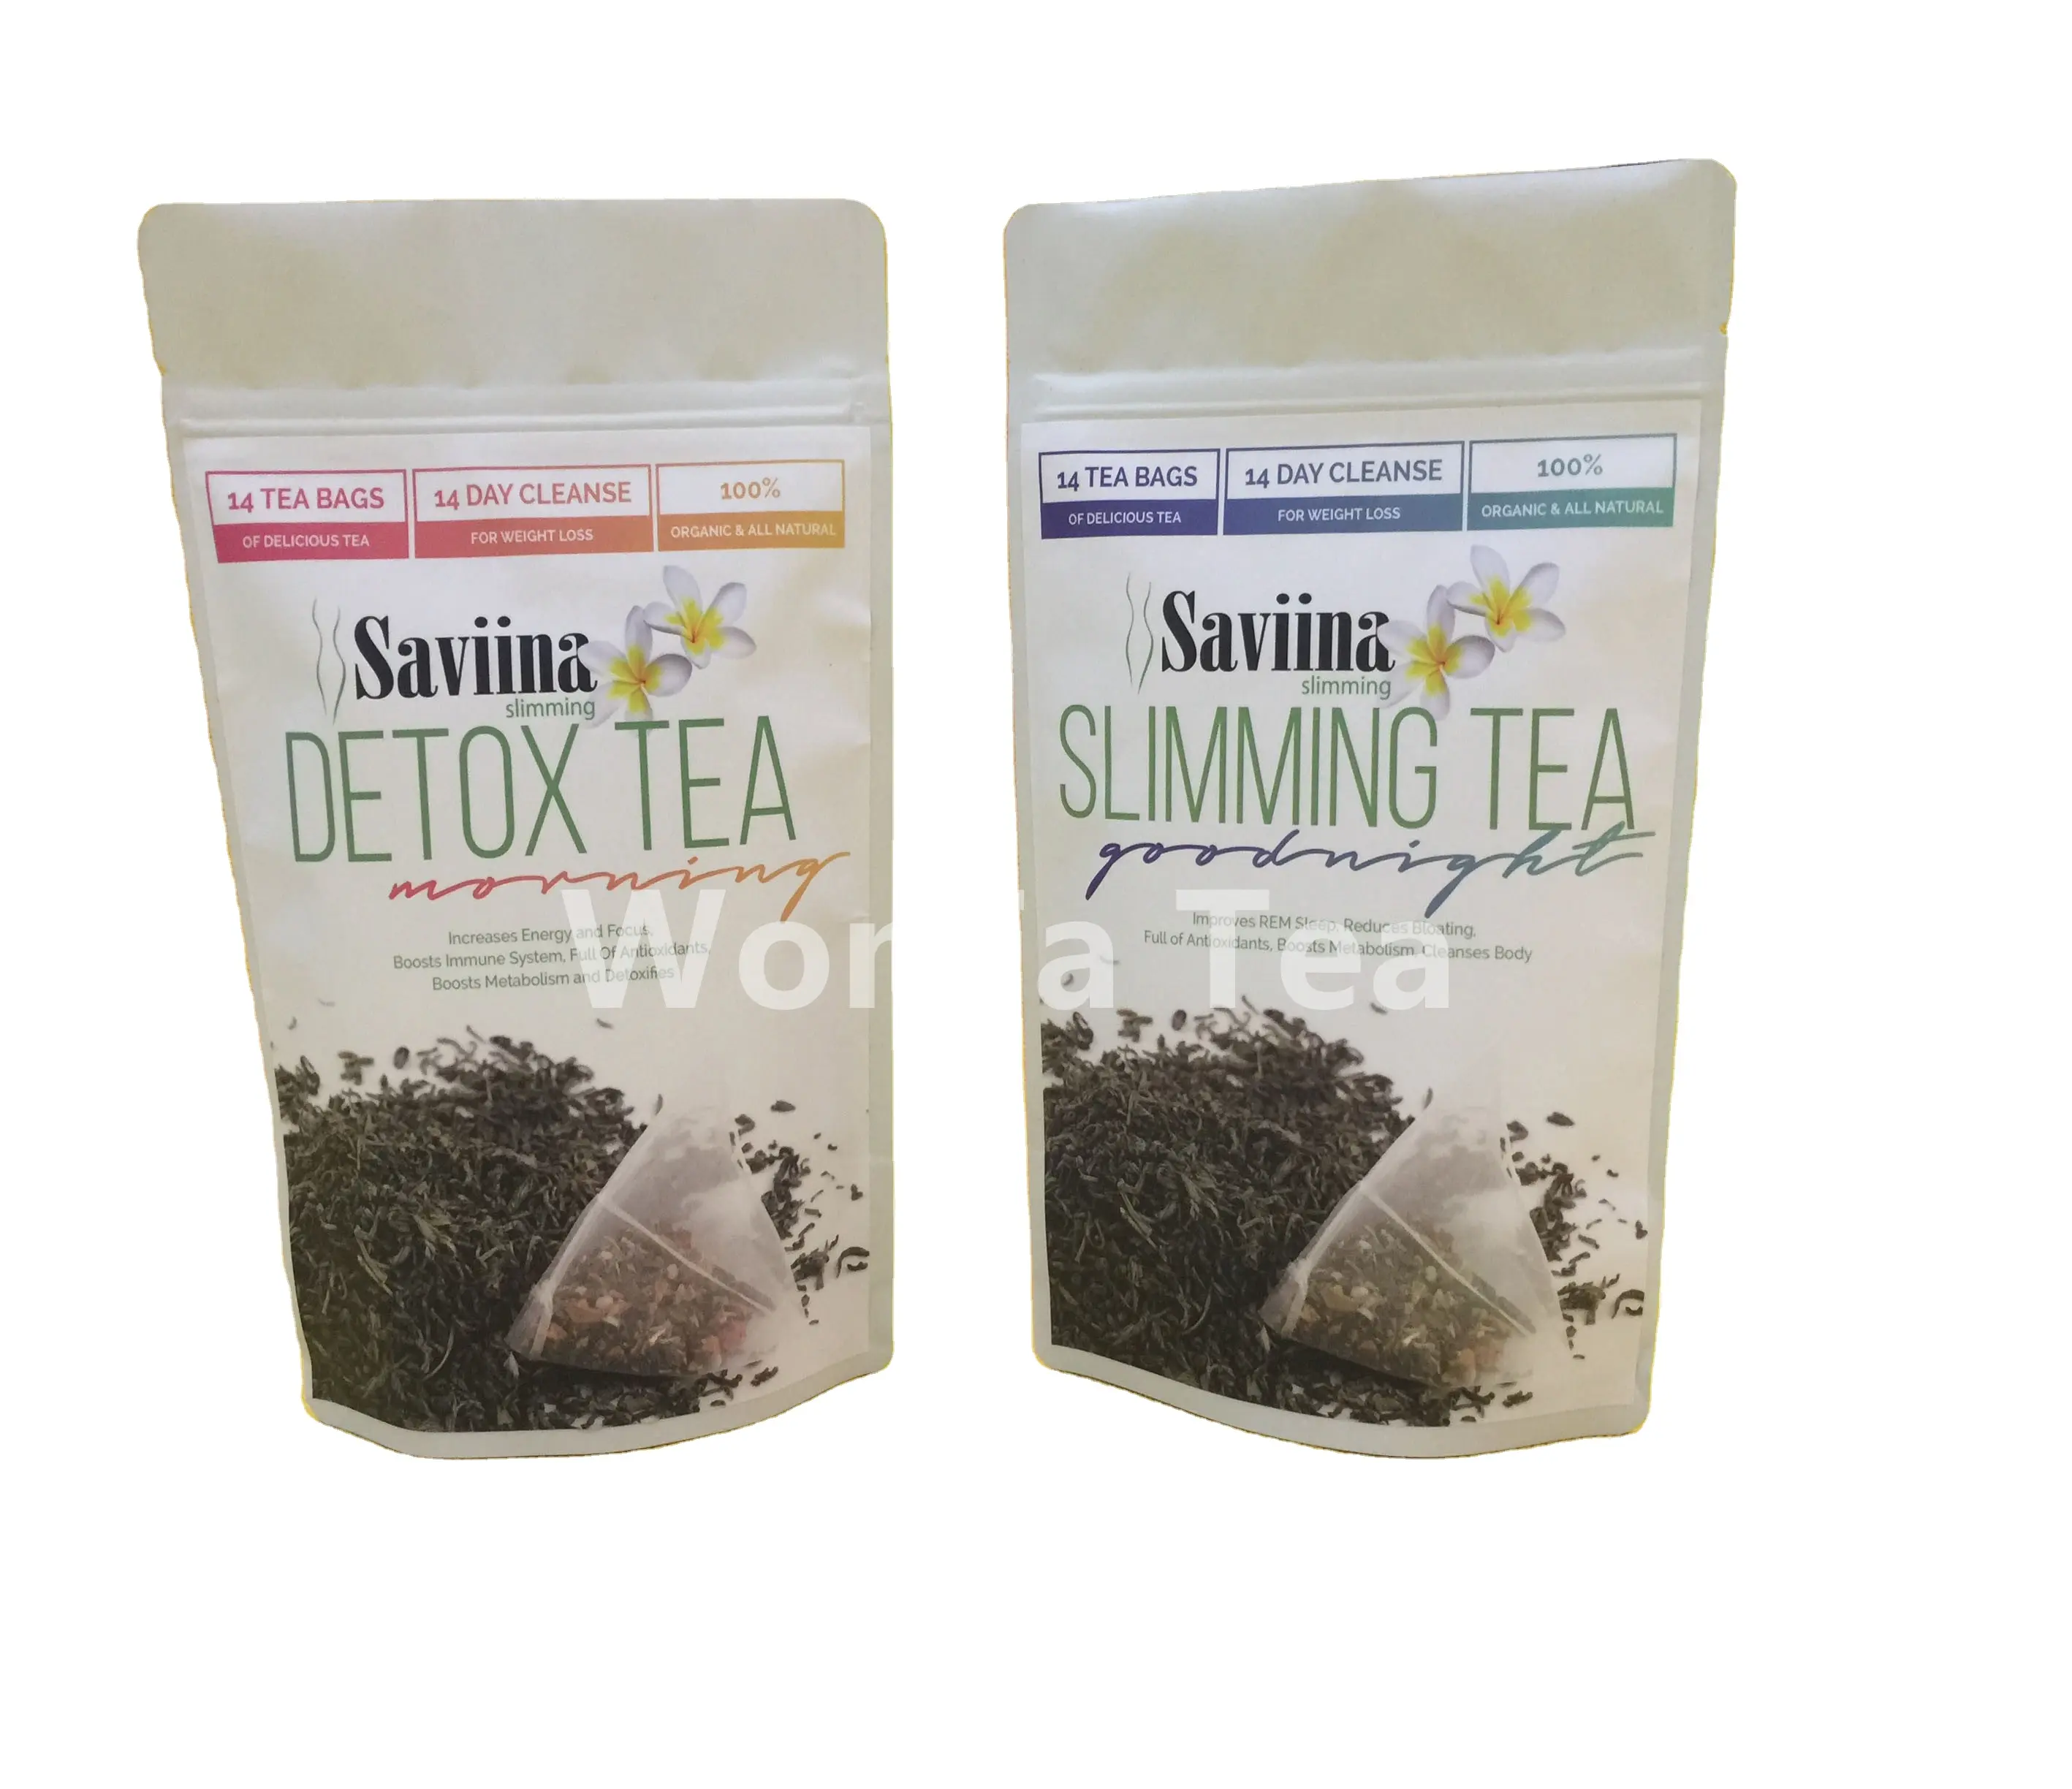 Evening Slimming detox Tea 14day package